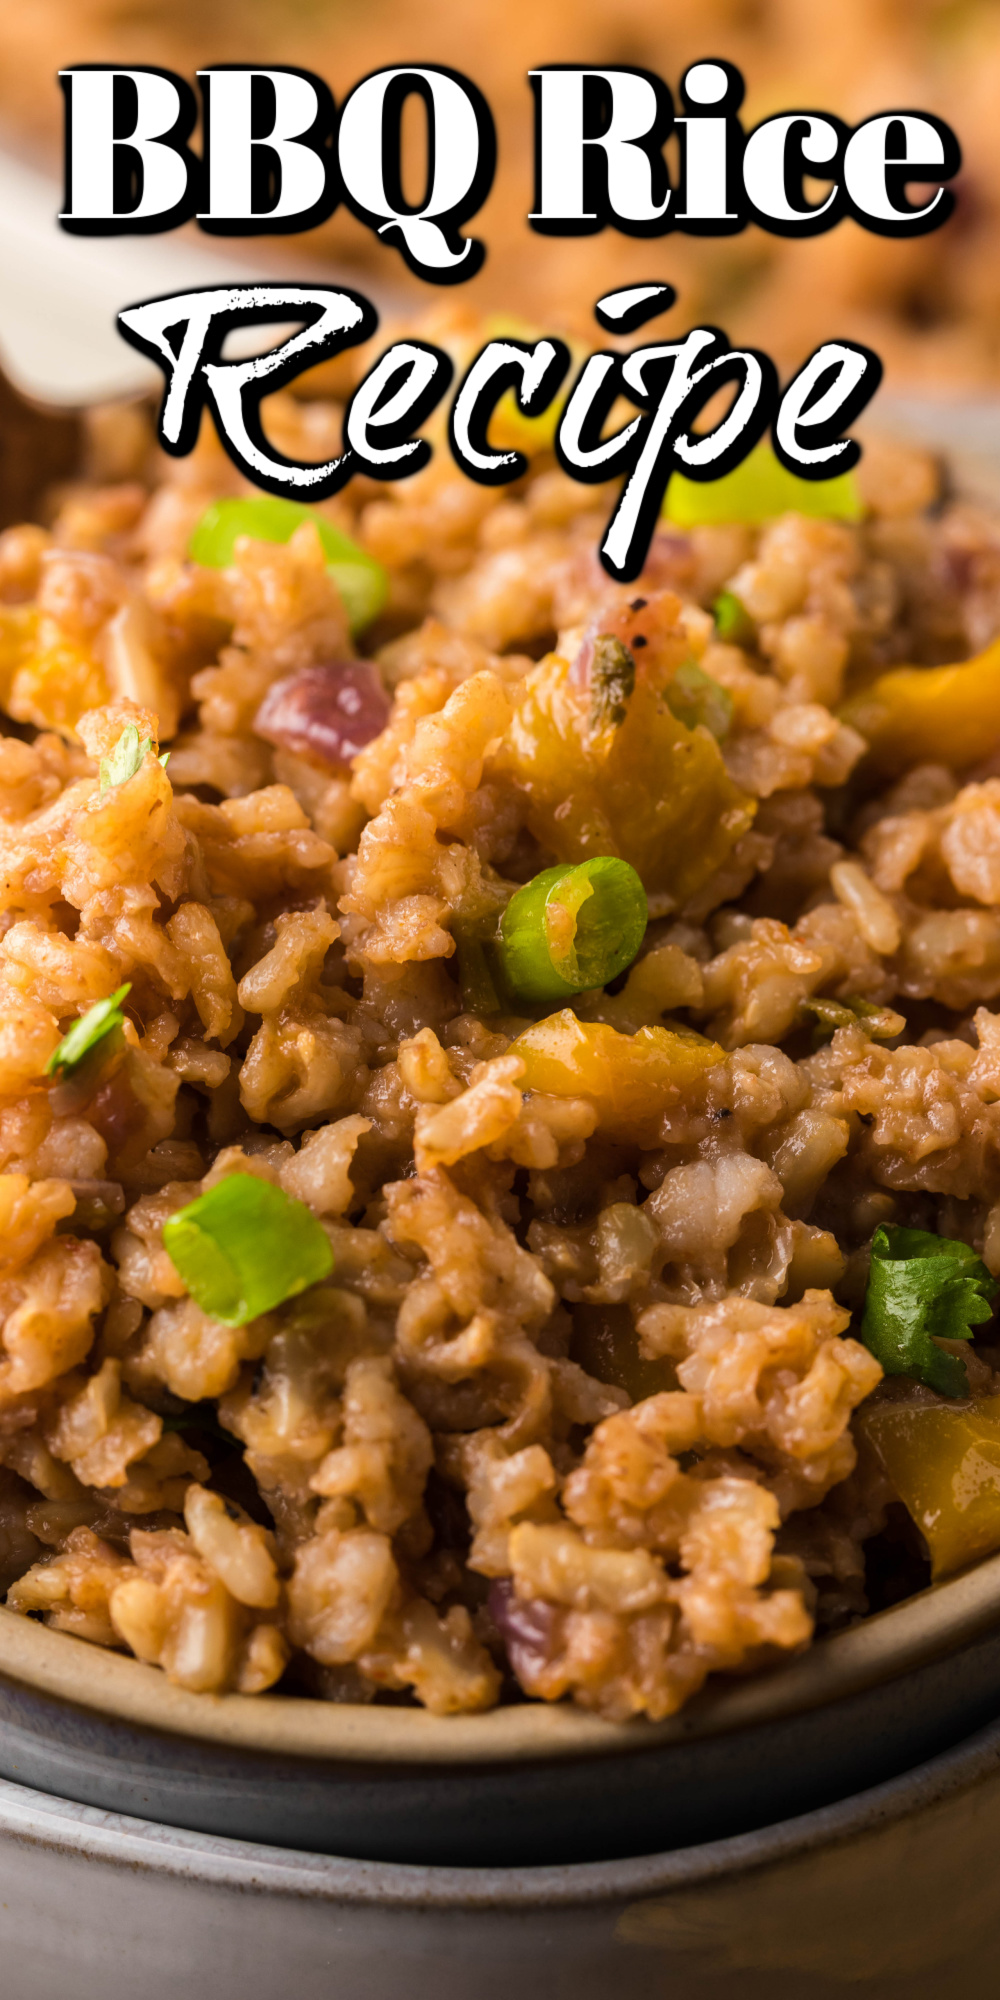 Looking for a great side dish, look no further than this amazing BBQ rice recipe. Using brown rice really adds a wonderful flavor to this dish!